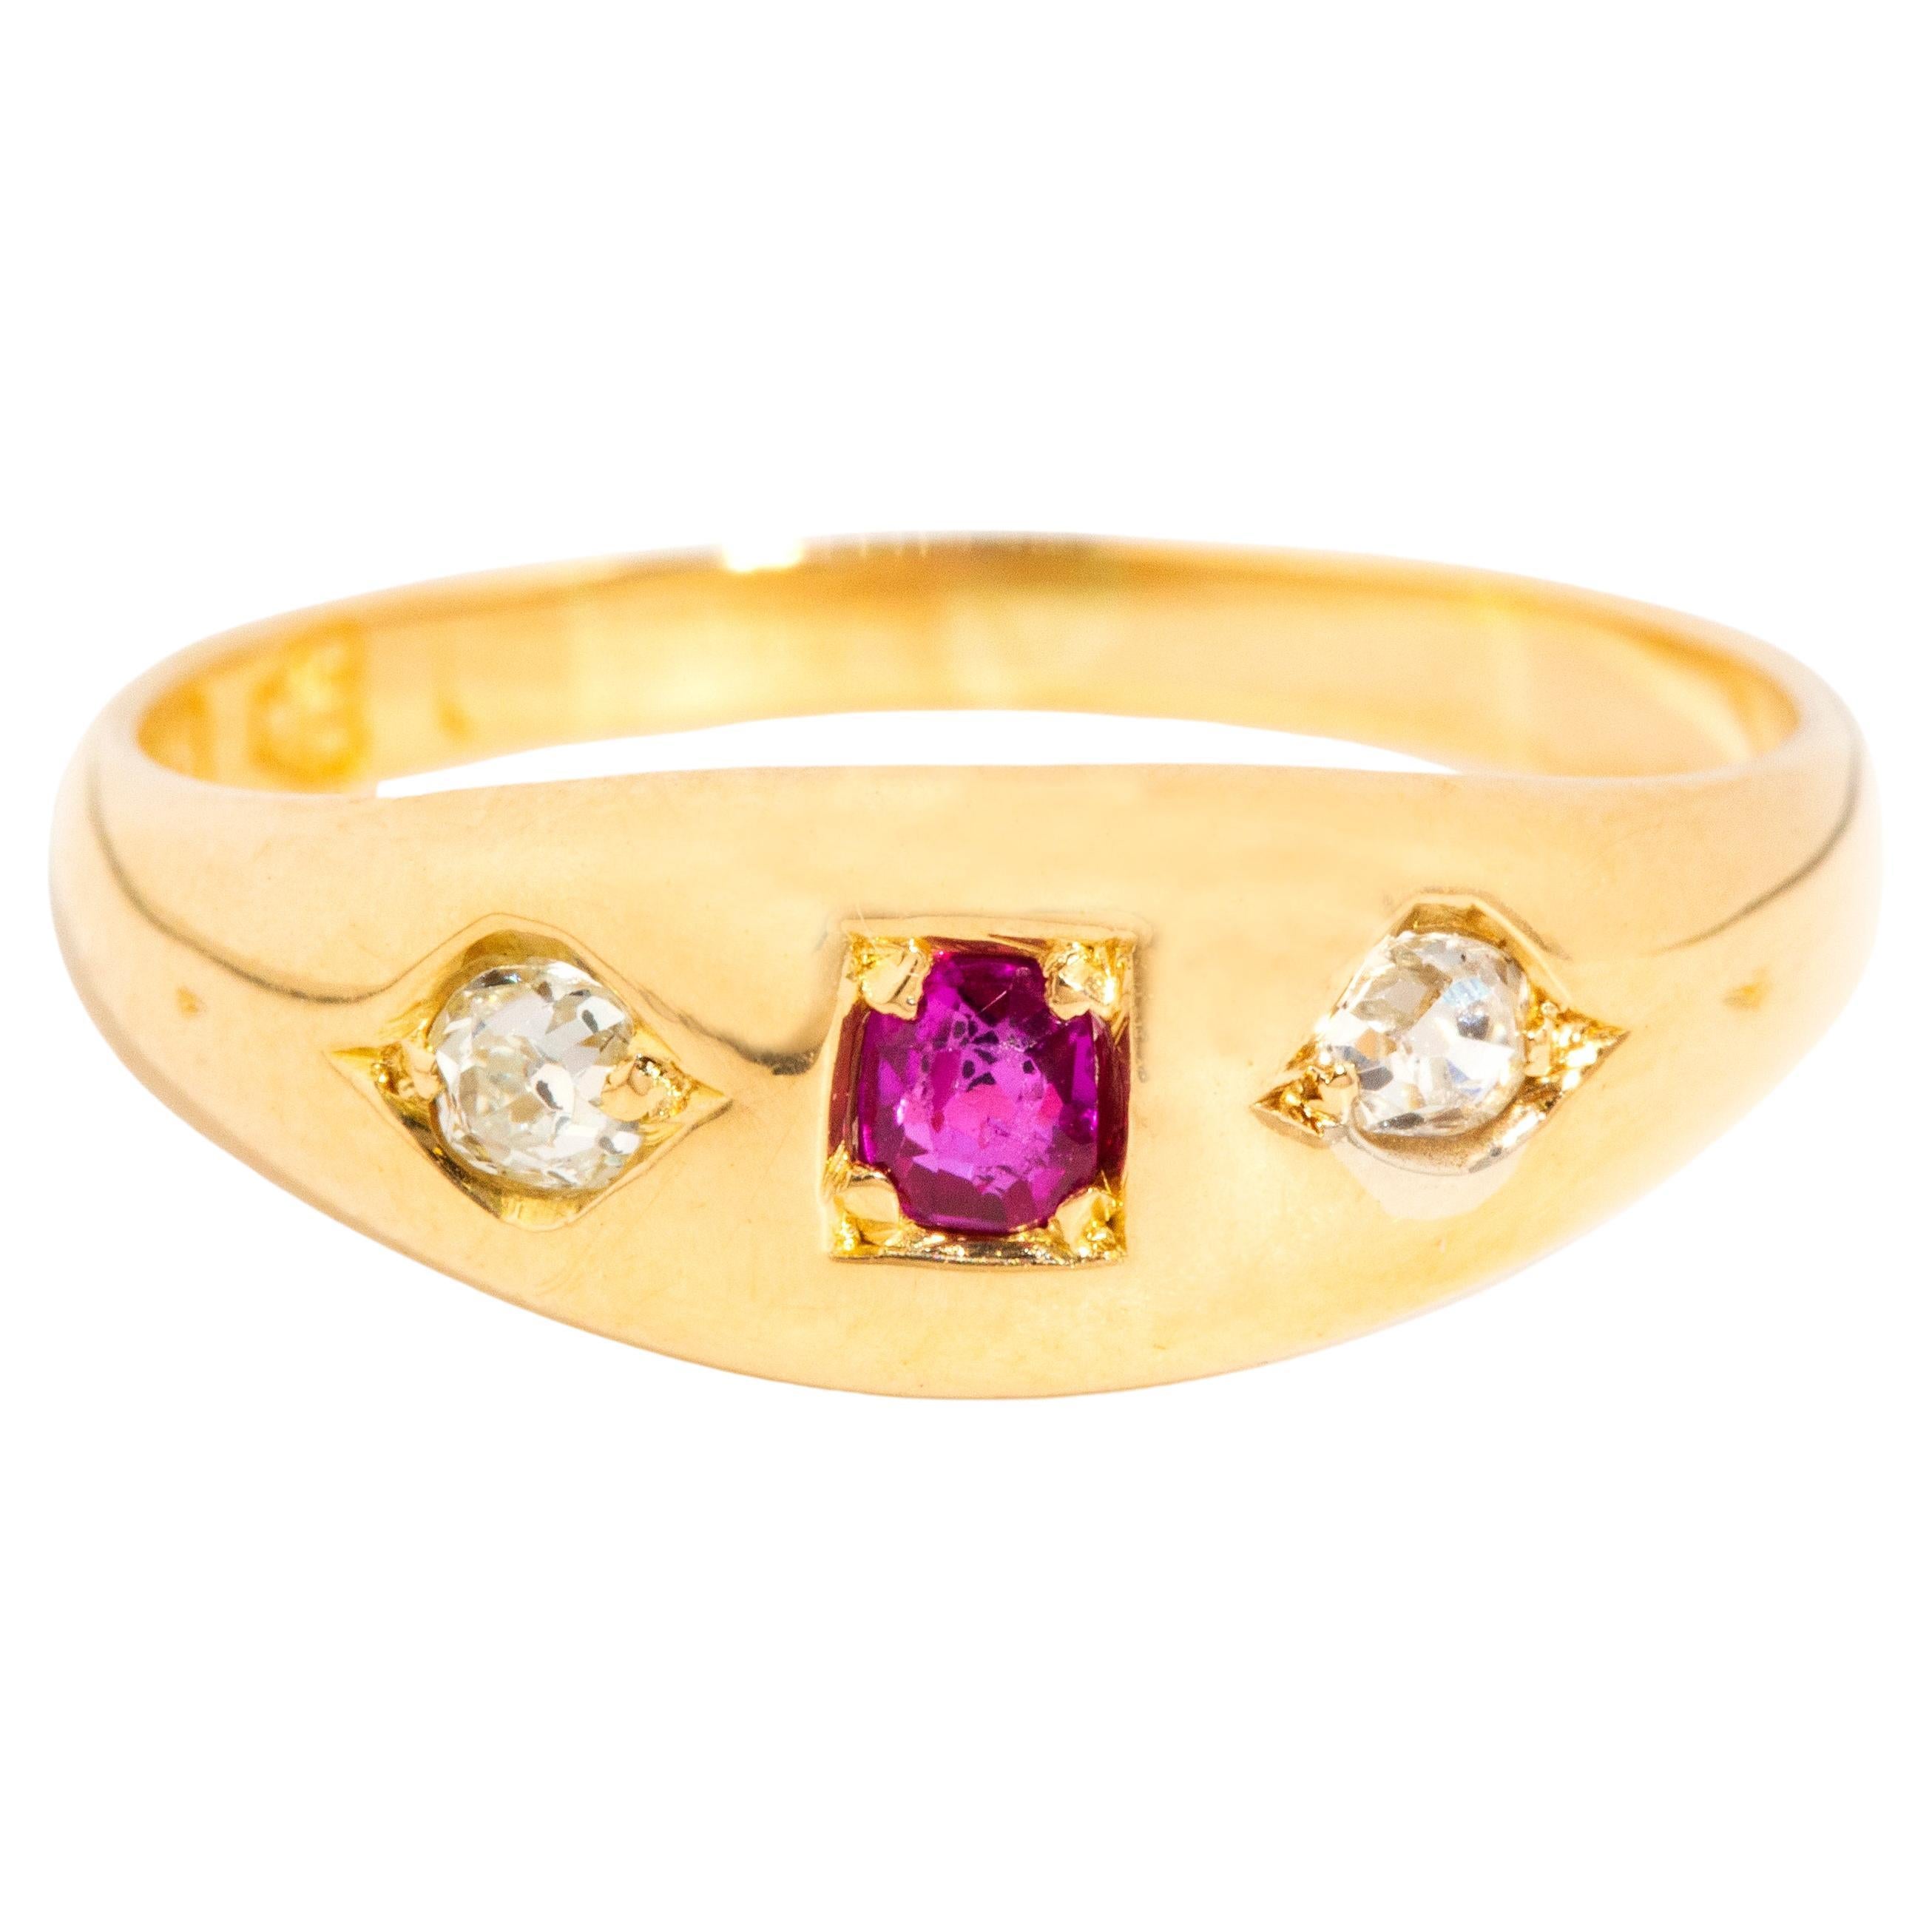 Antique Victorian Era Bright Red Pink Ruby & Old Cut Diamond Ring 18 Carat Gold